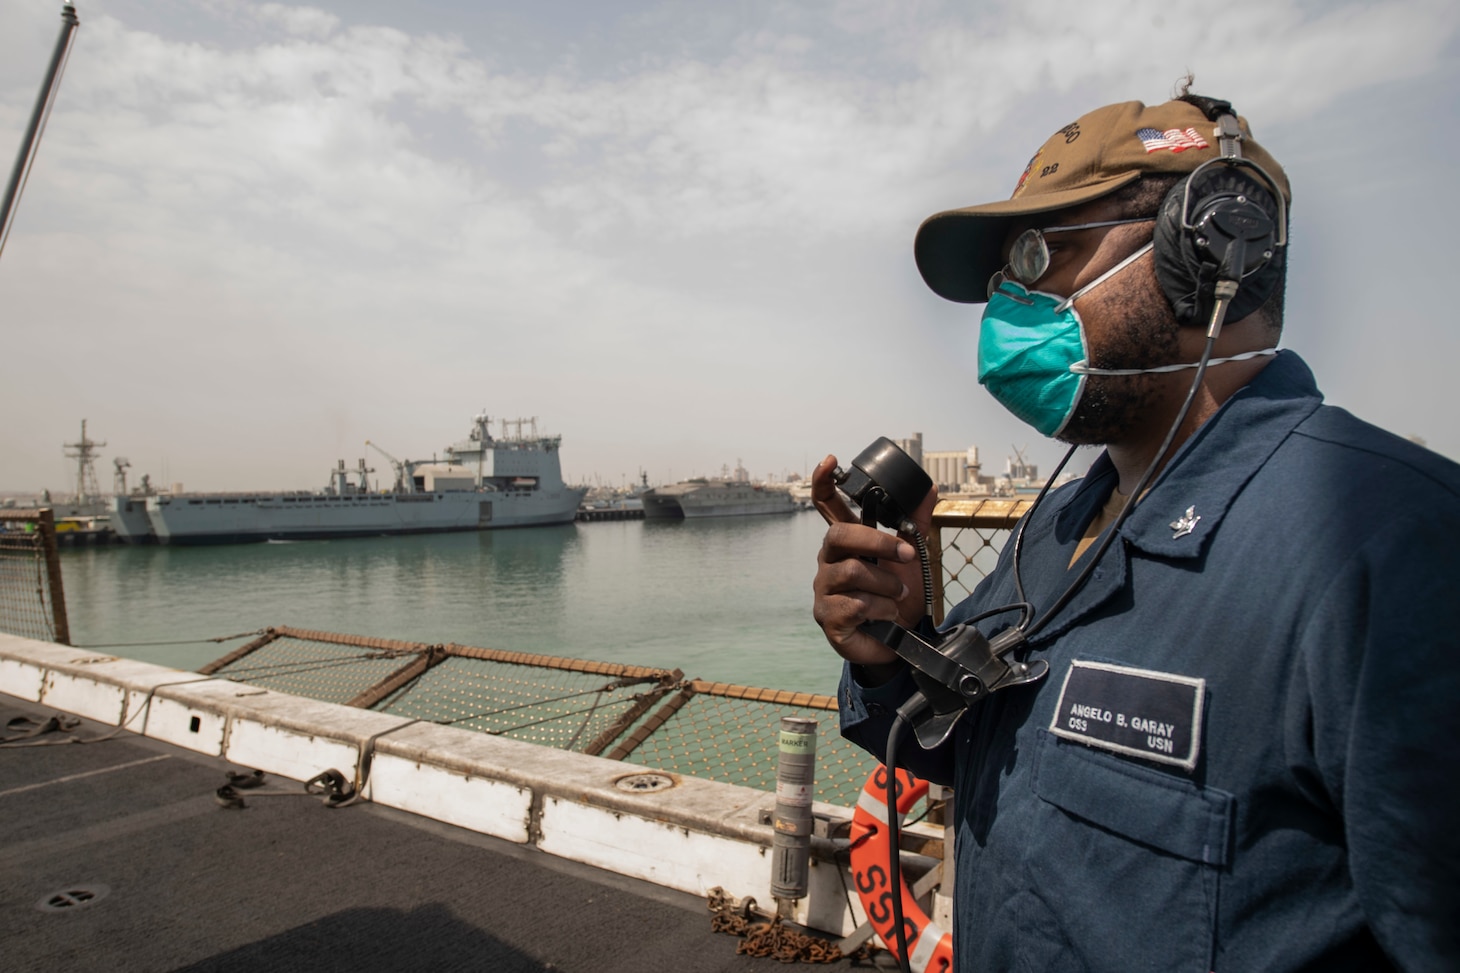 Operations Specialist 2nd Class Angelo Garay stands watch on the flight deck of amphibious transport dock ship USS San Diego (LPD 22) as the ship departs Manama, Bahrain.